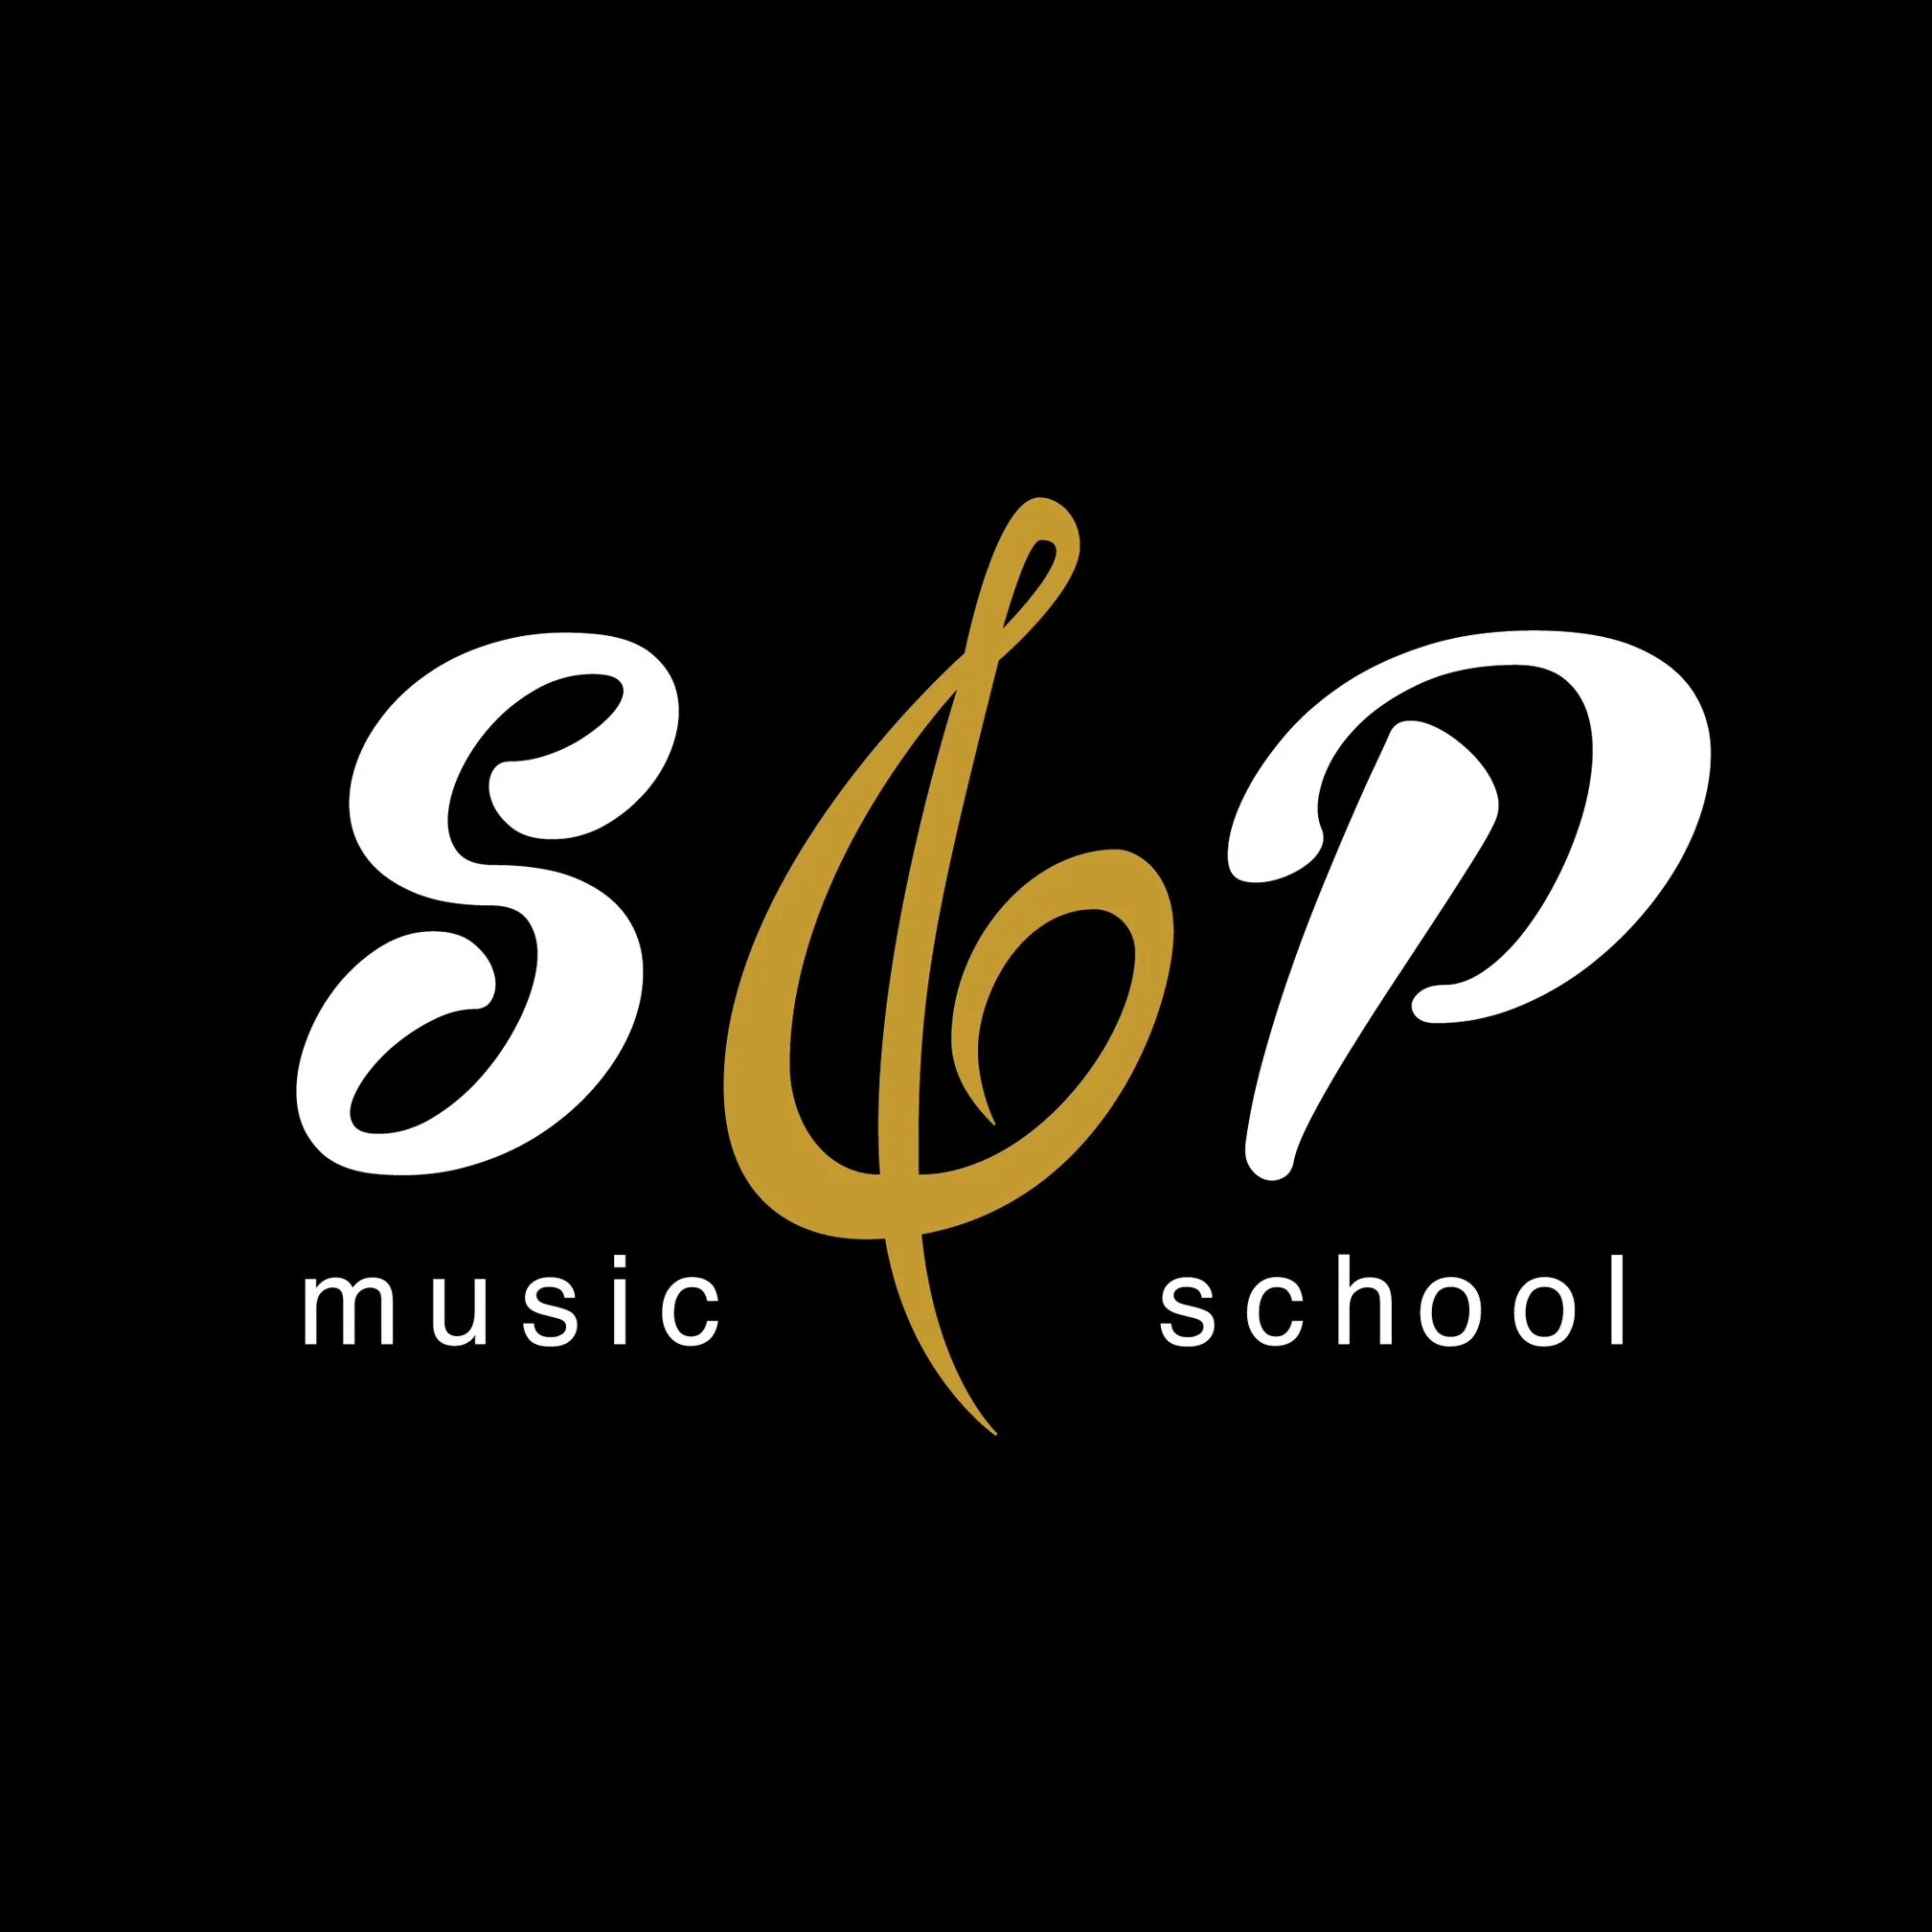 Sing and play 3. Play and Sing. School Sing Sing. M Musical School logo.